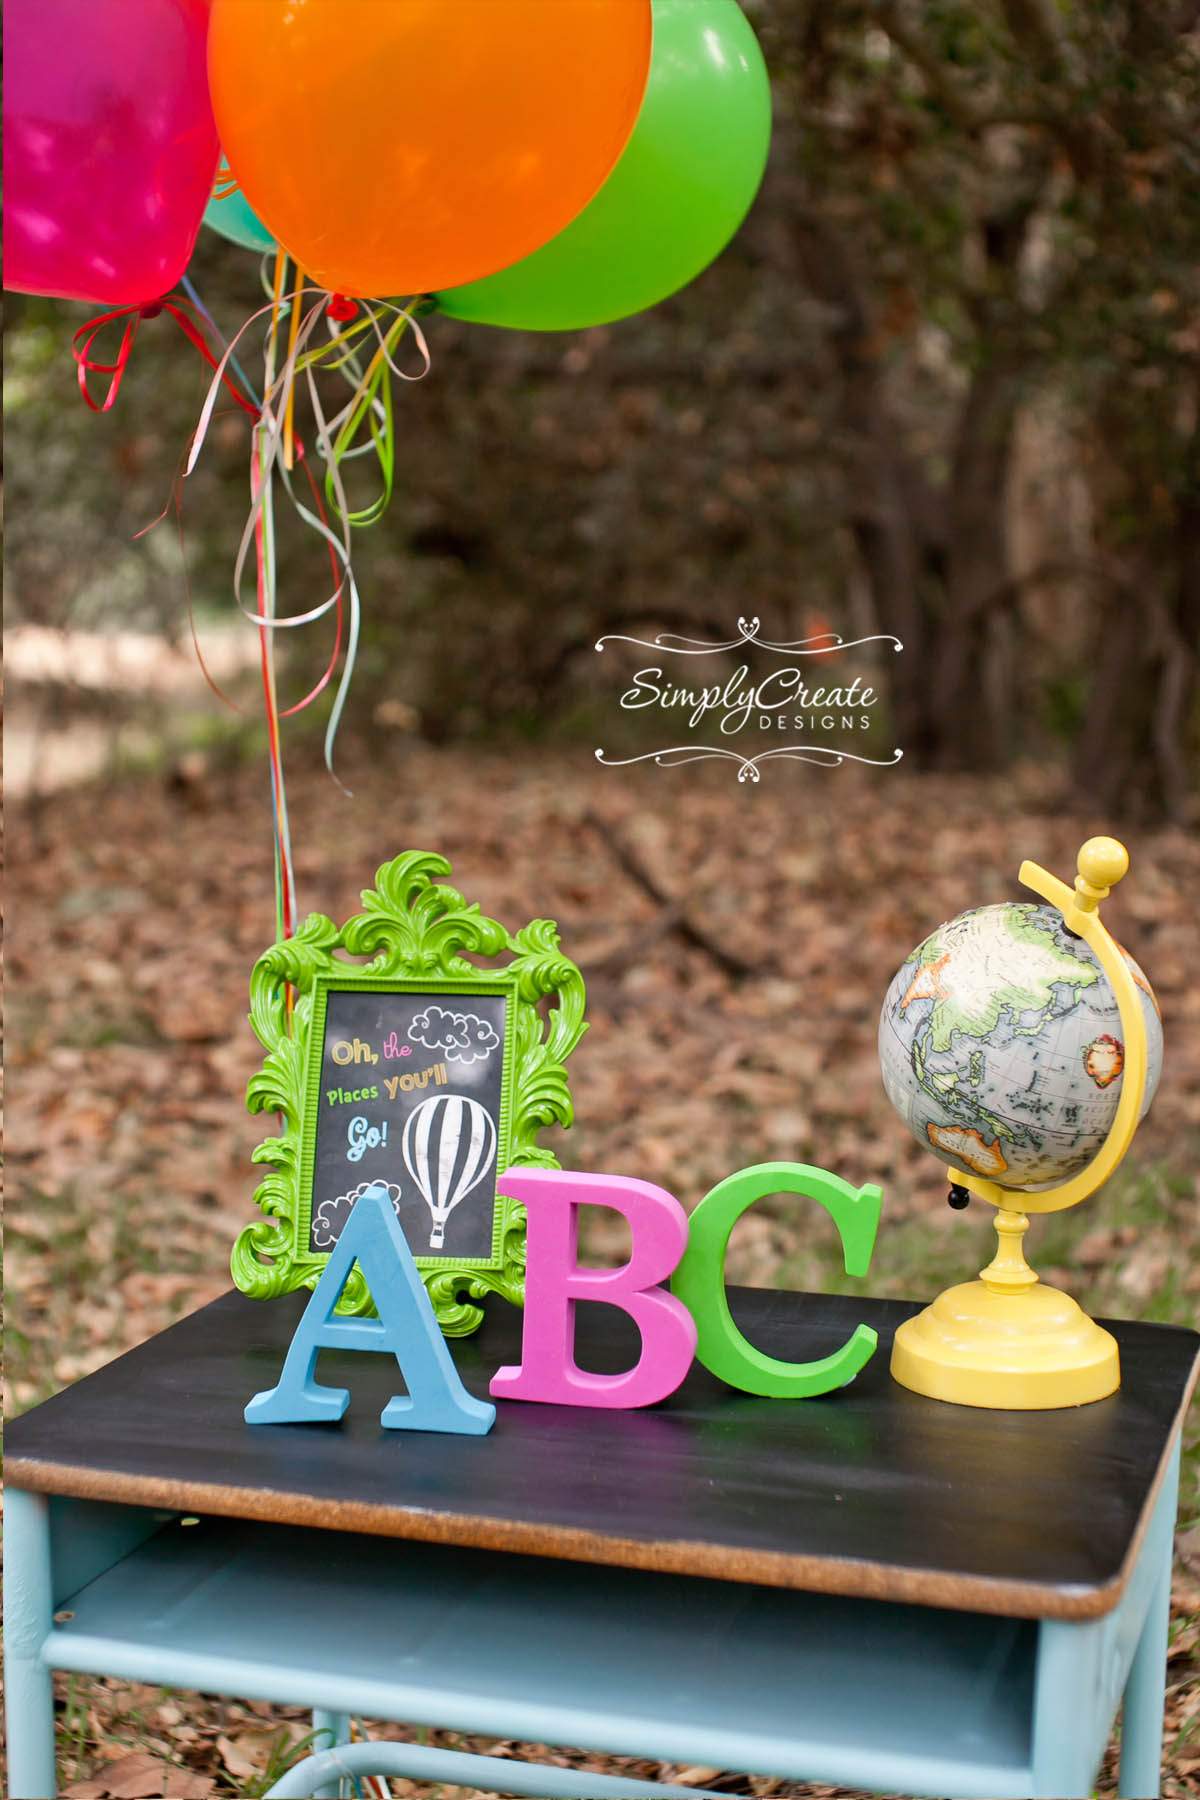 Preschool graduation ideas include party themes like this Dr. Suess one. A toy globe, a green picture frame, and three large A, B, C letters are shown.